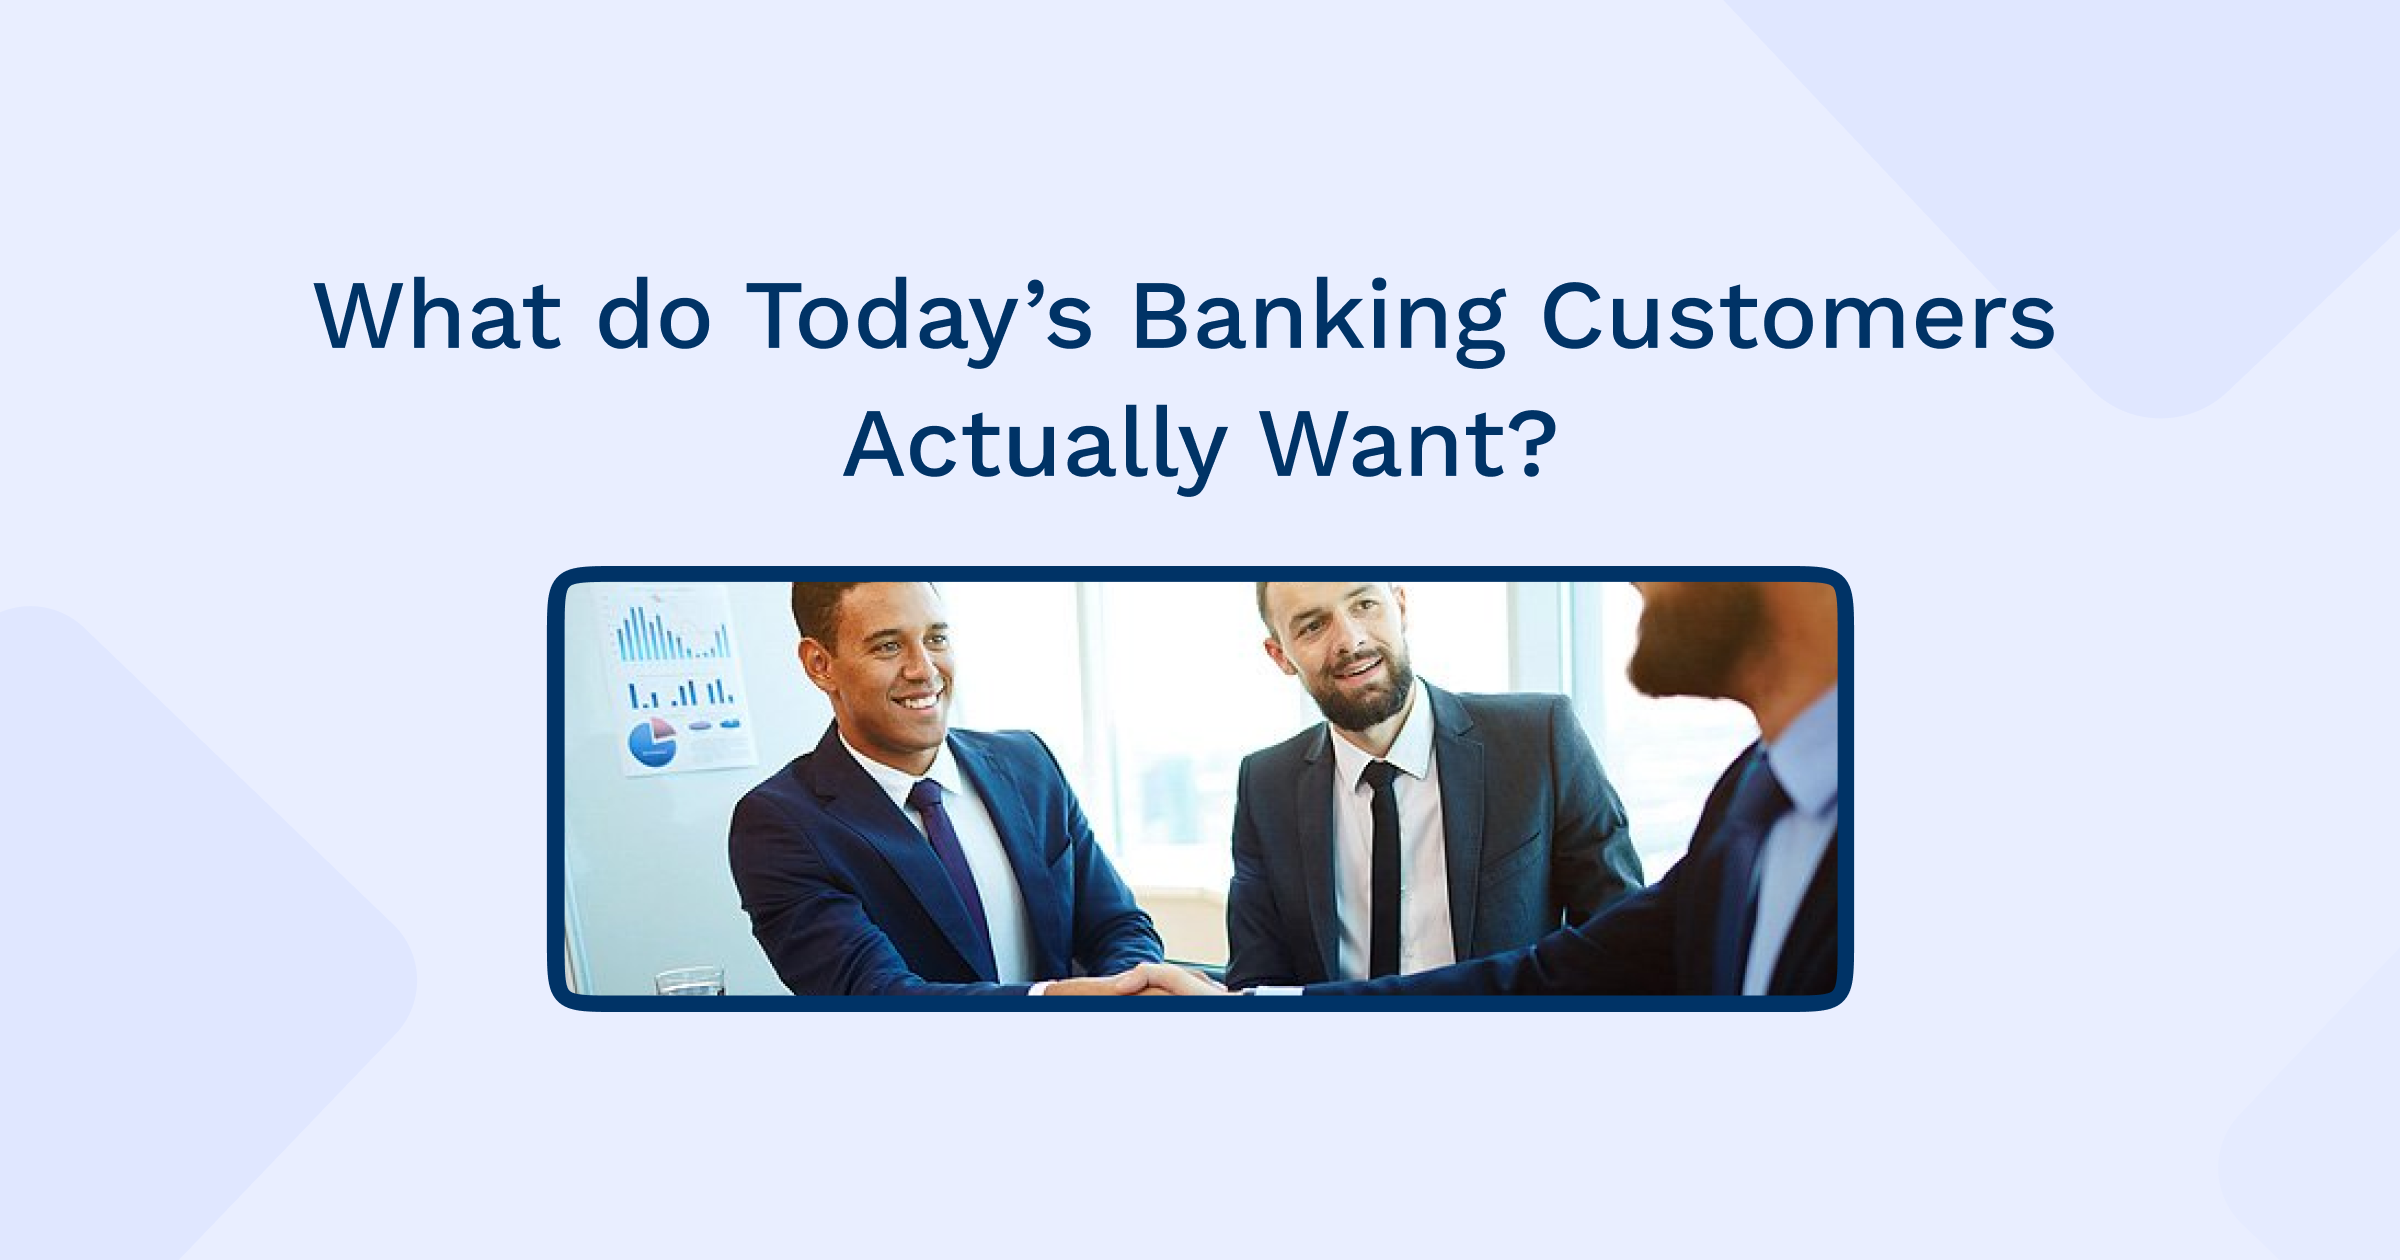 What do Today’s Banking Customers Actually Want?